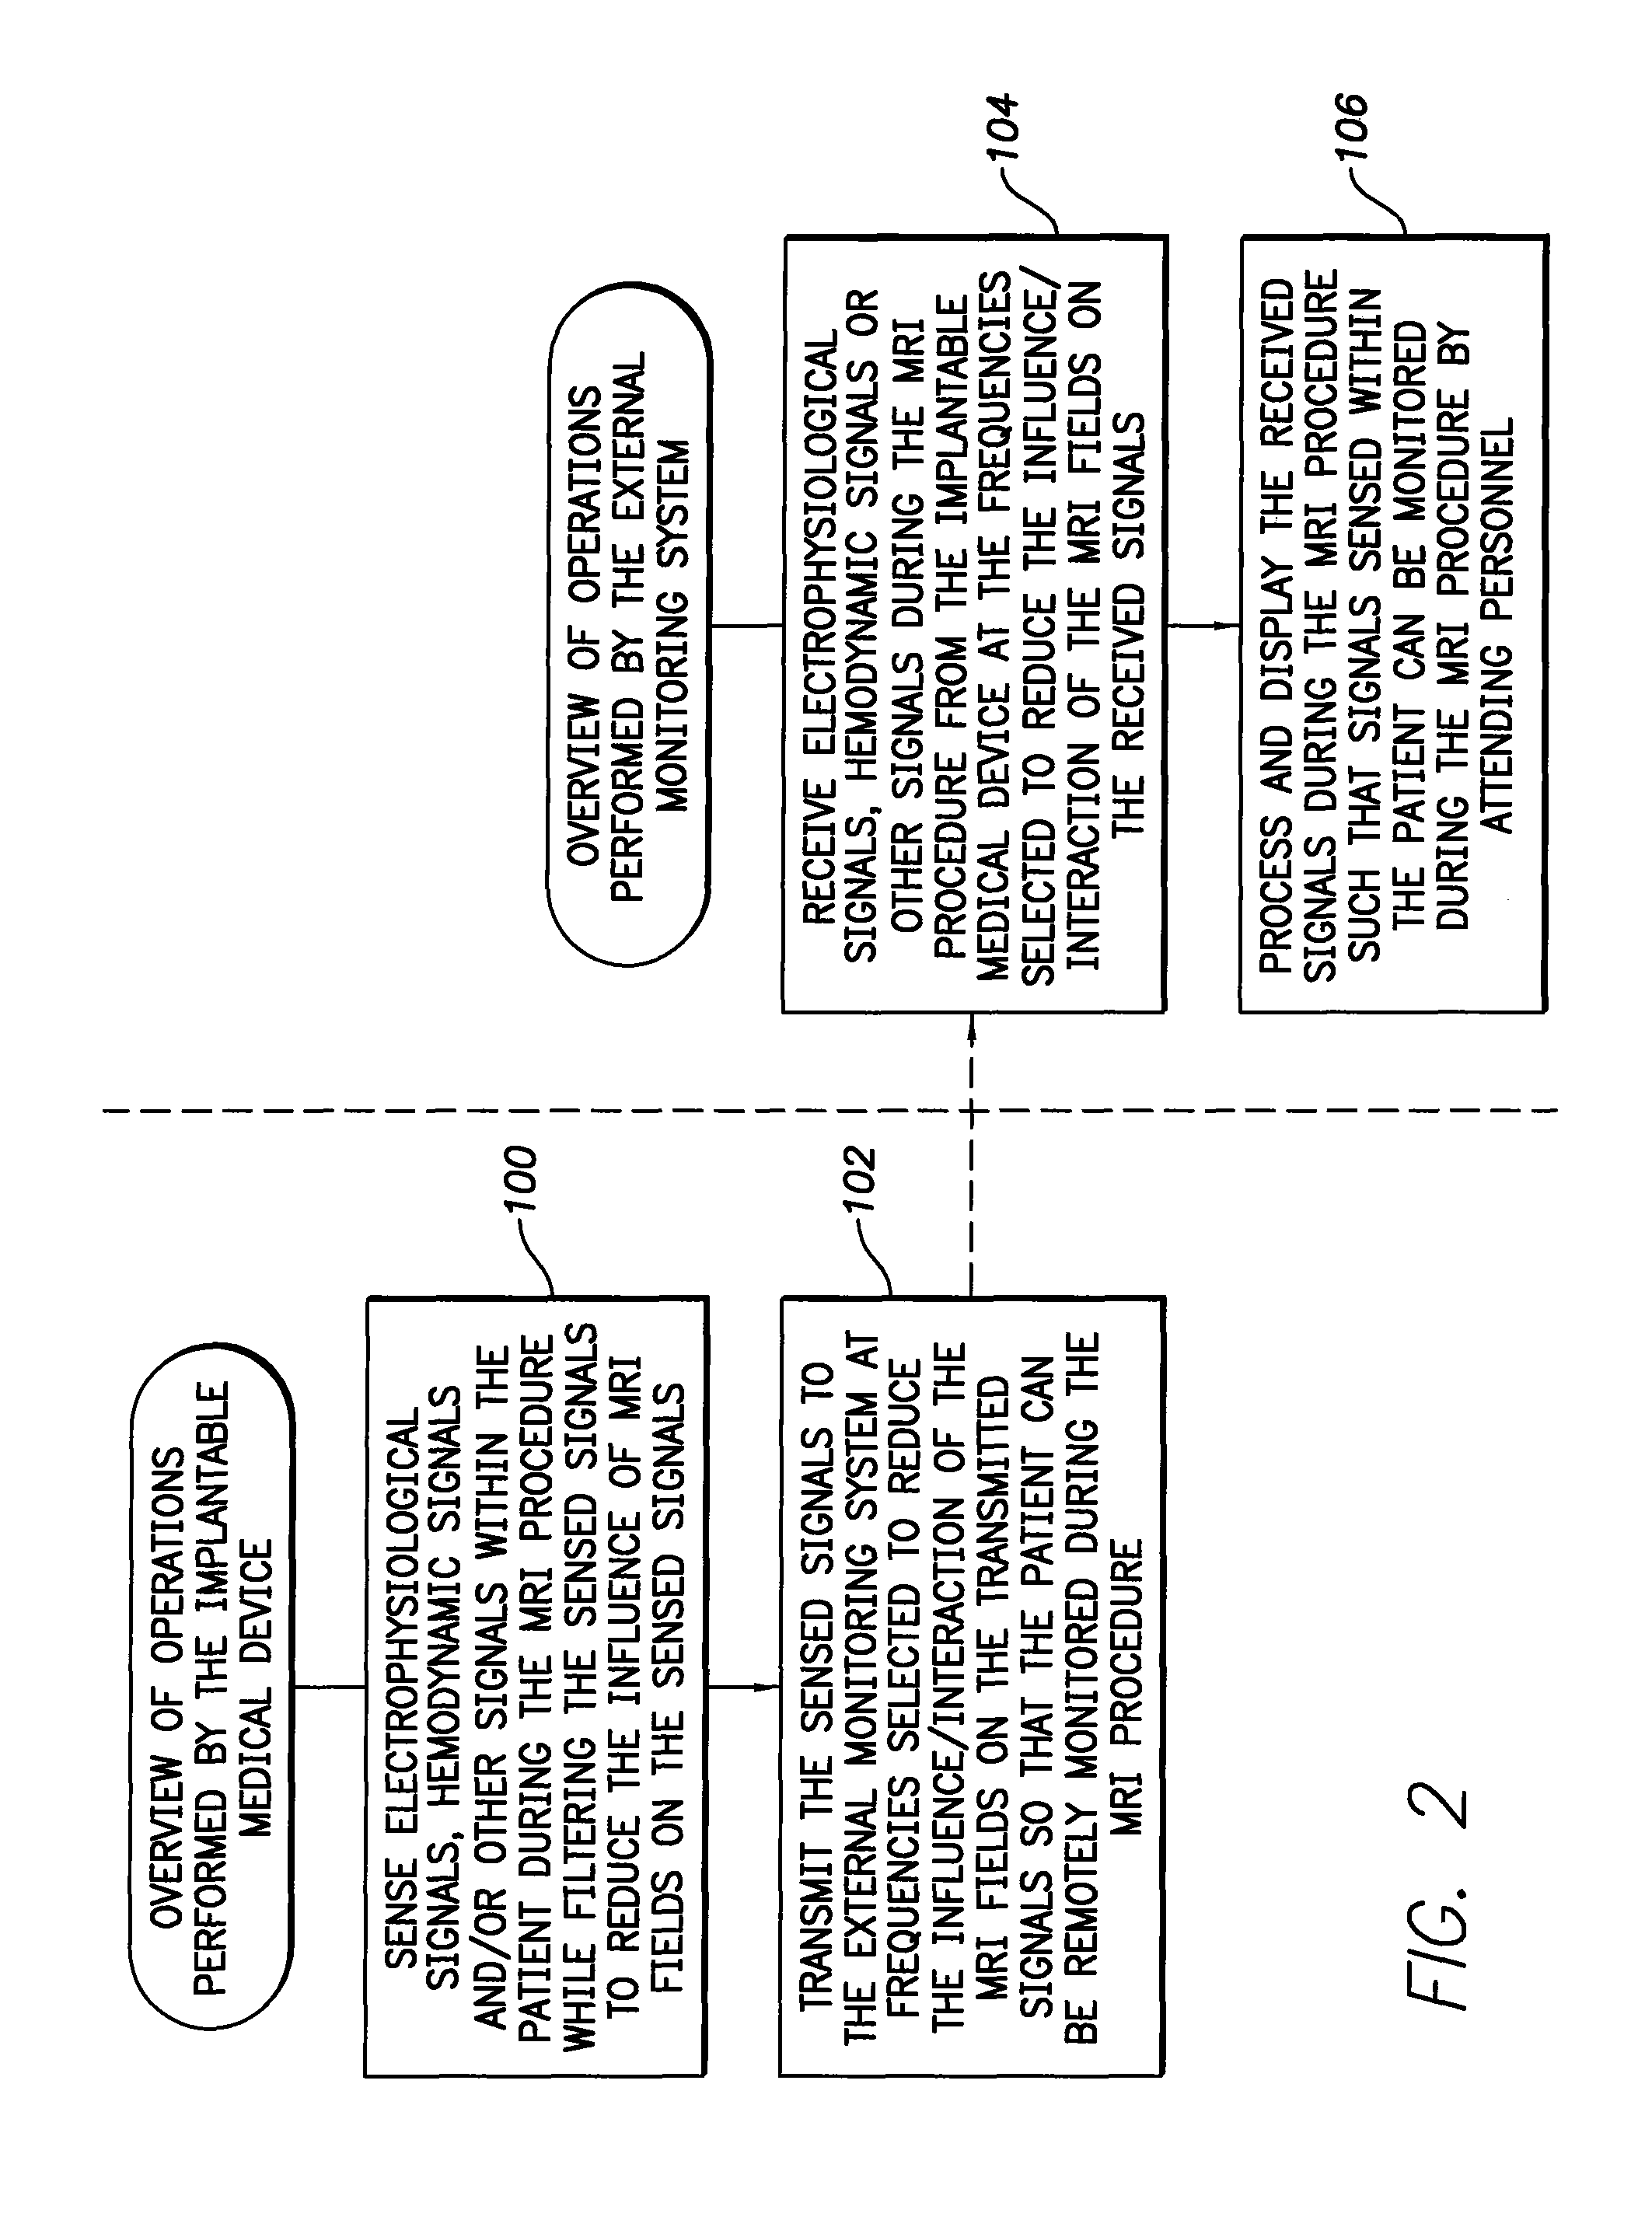 Systems and methods for remote monitoring of signals sensed by an implantable medical device during an MRI